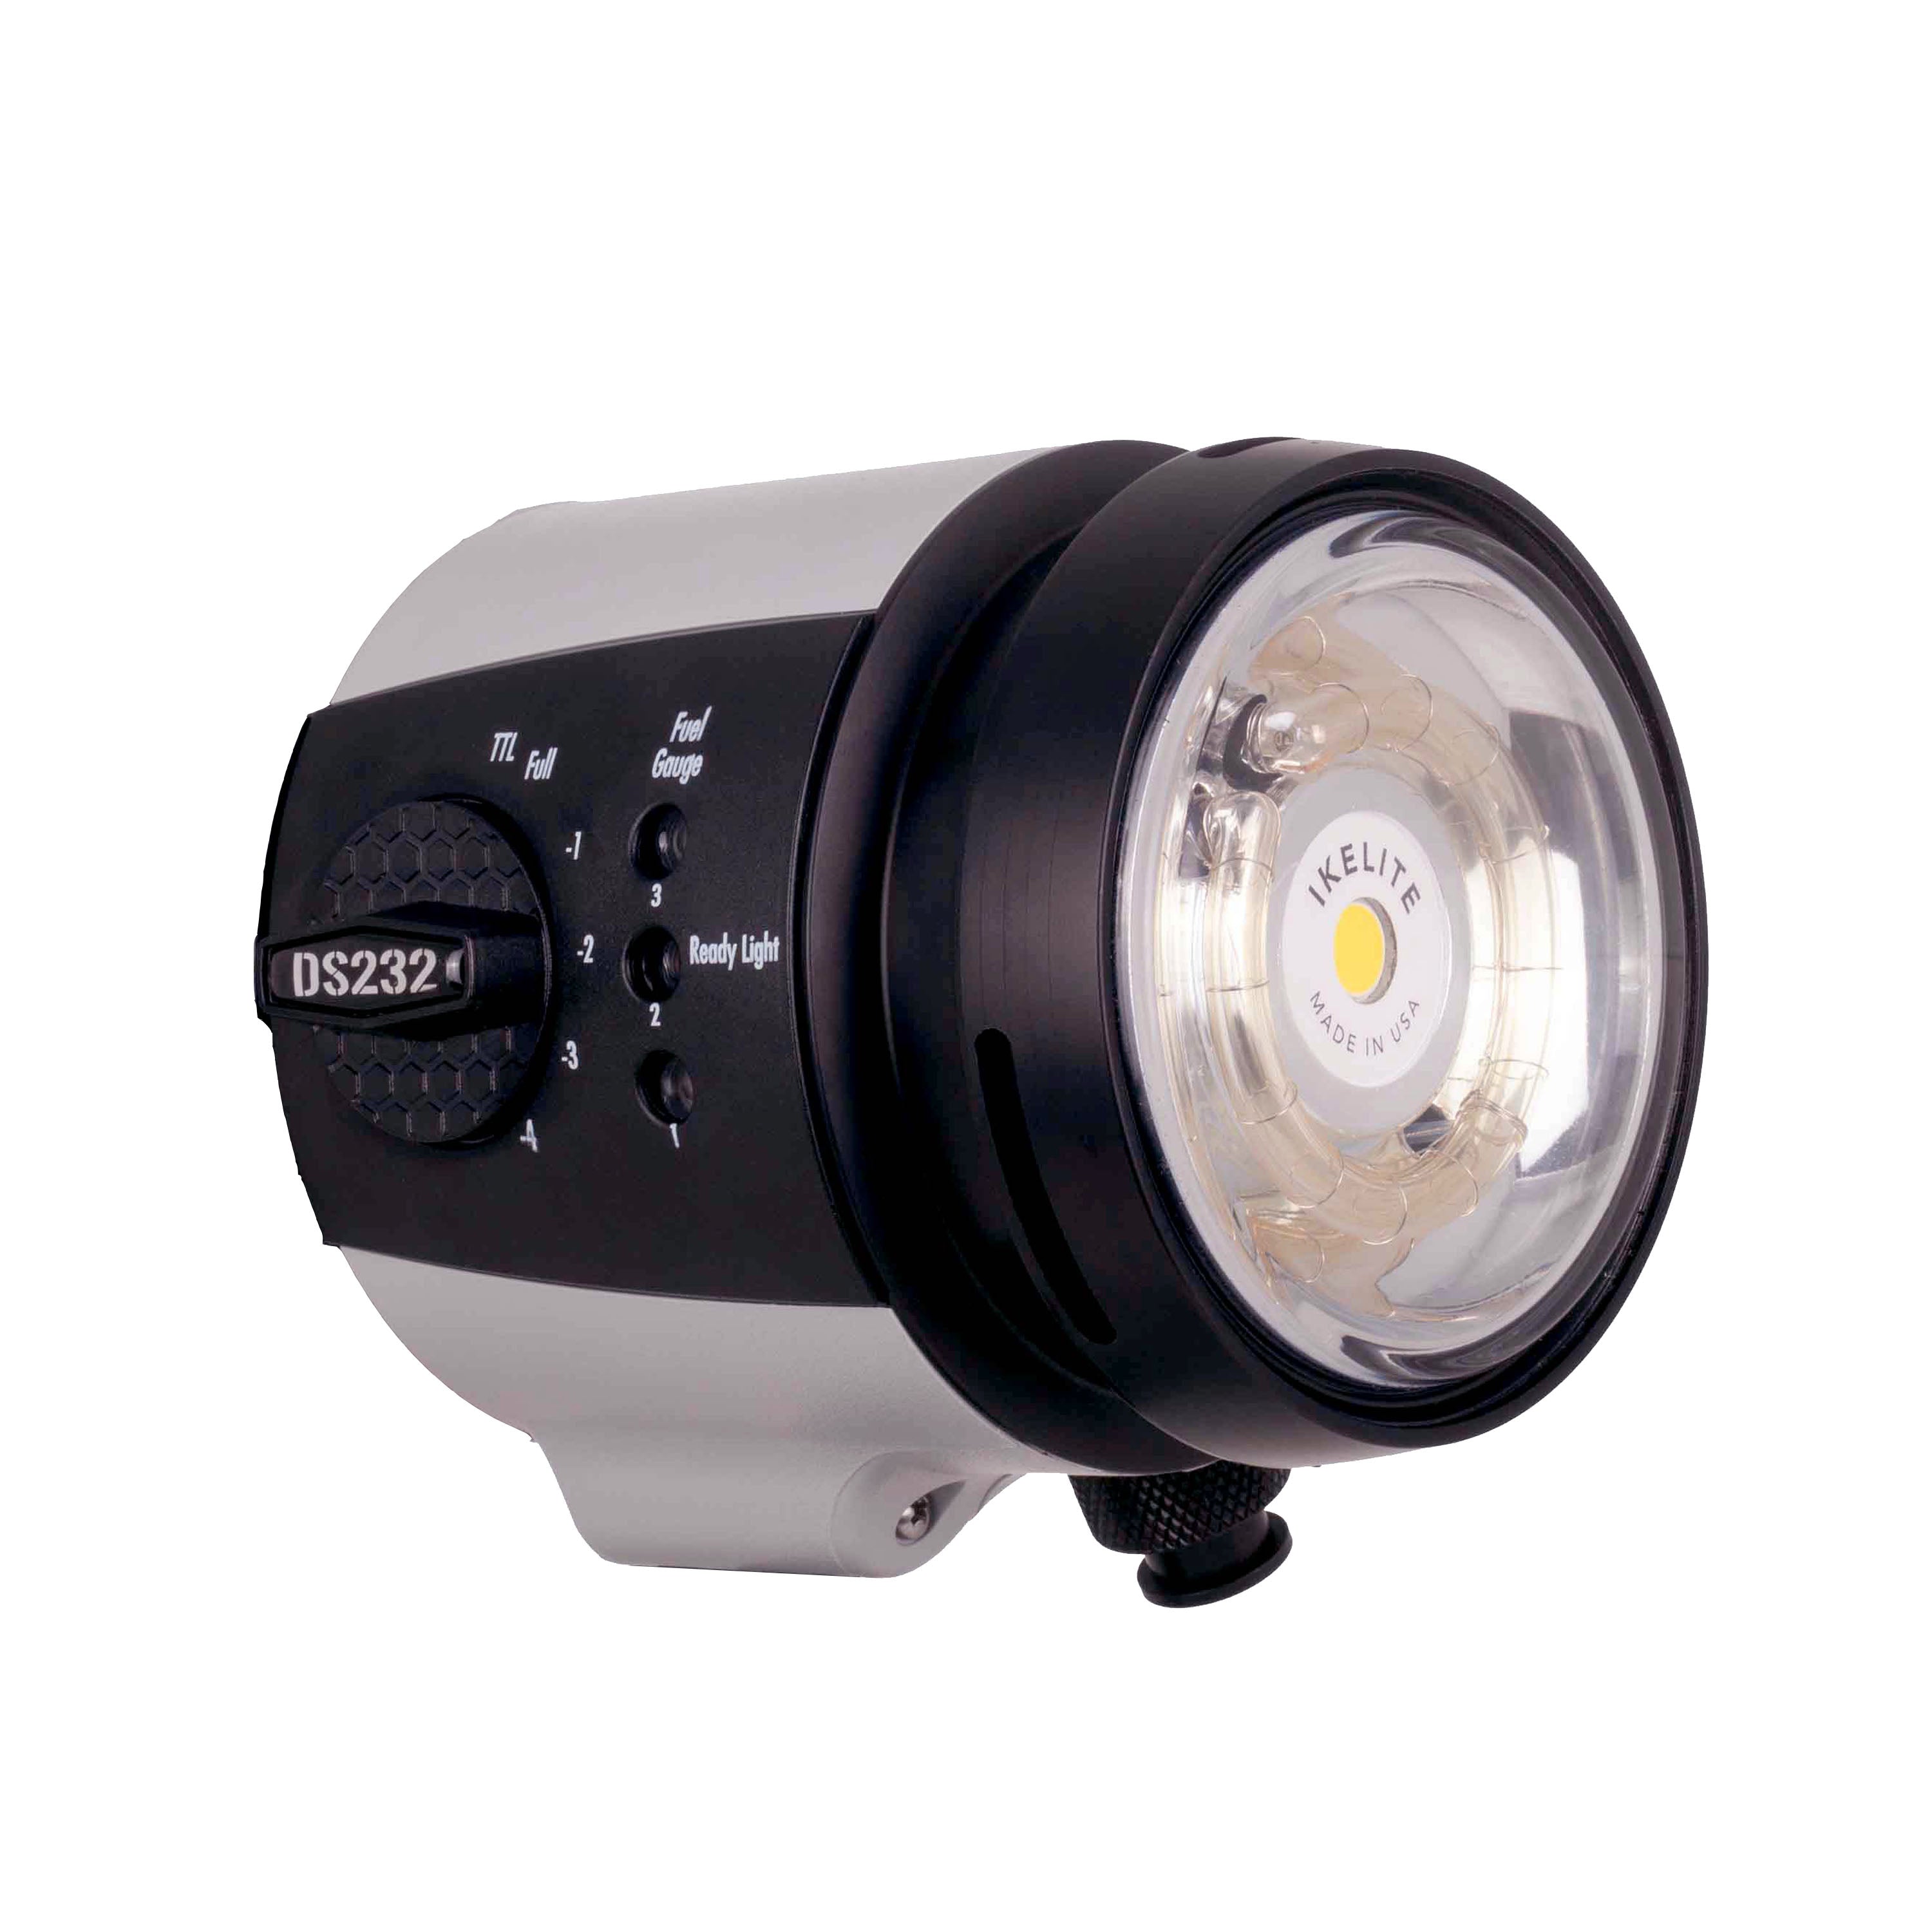 Ikelite DS232 Strobe Front with Video Light